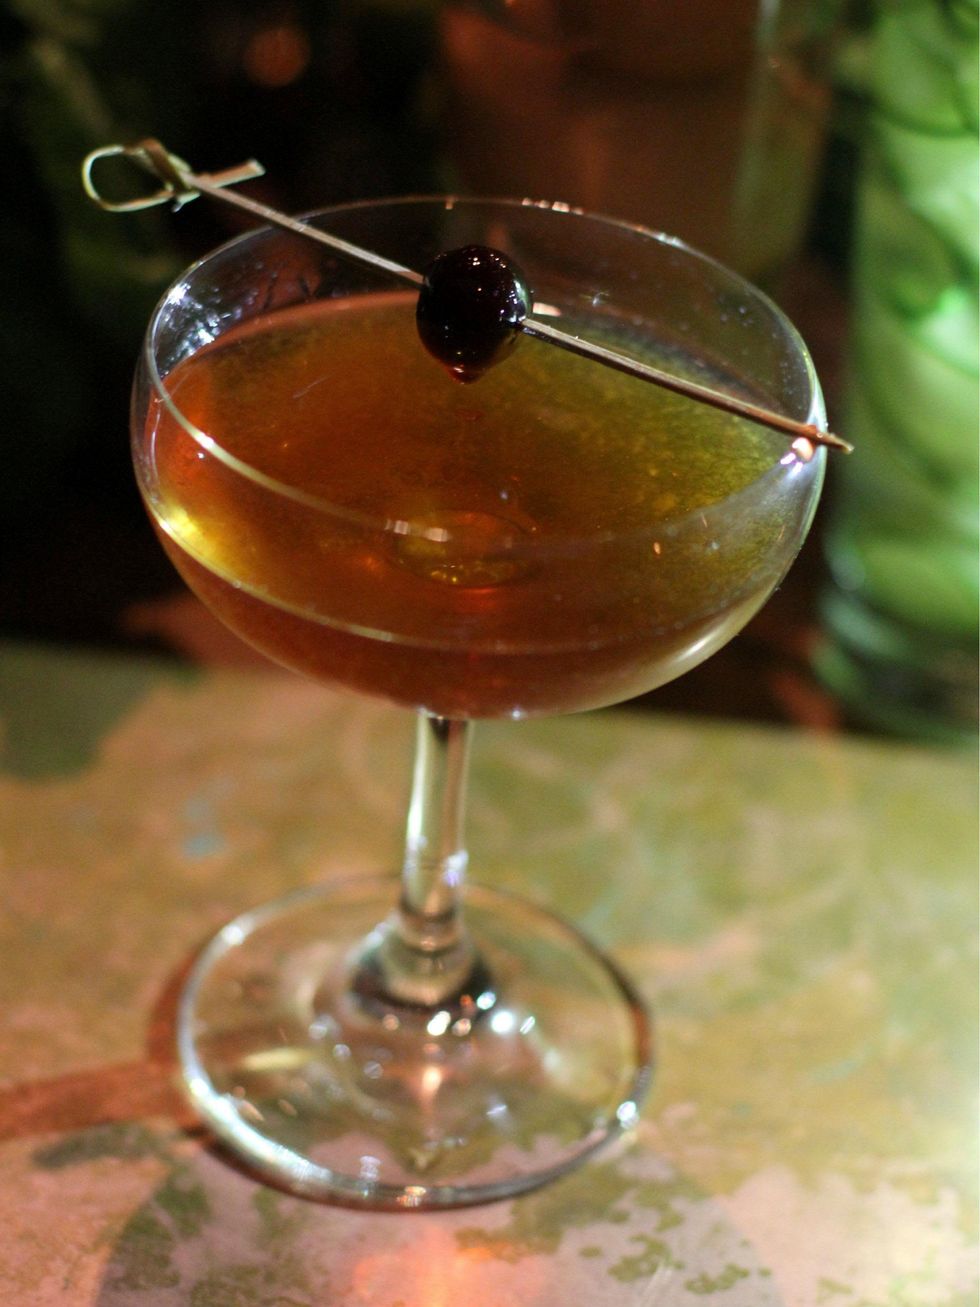 Fernanda Rossano's drink at Woodford Reserve Manhattan party